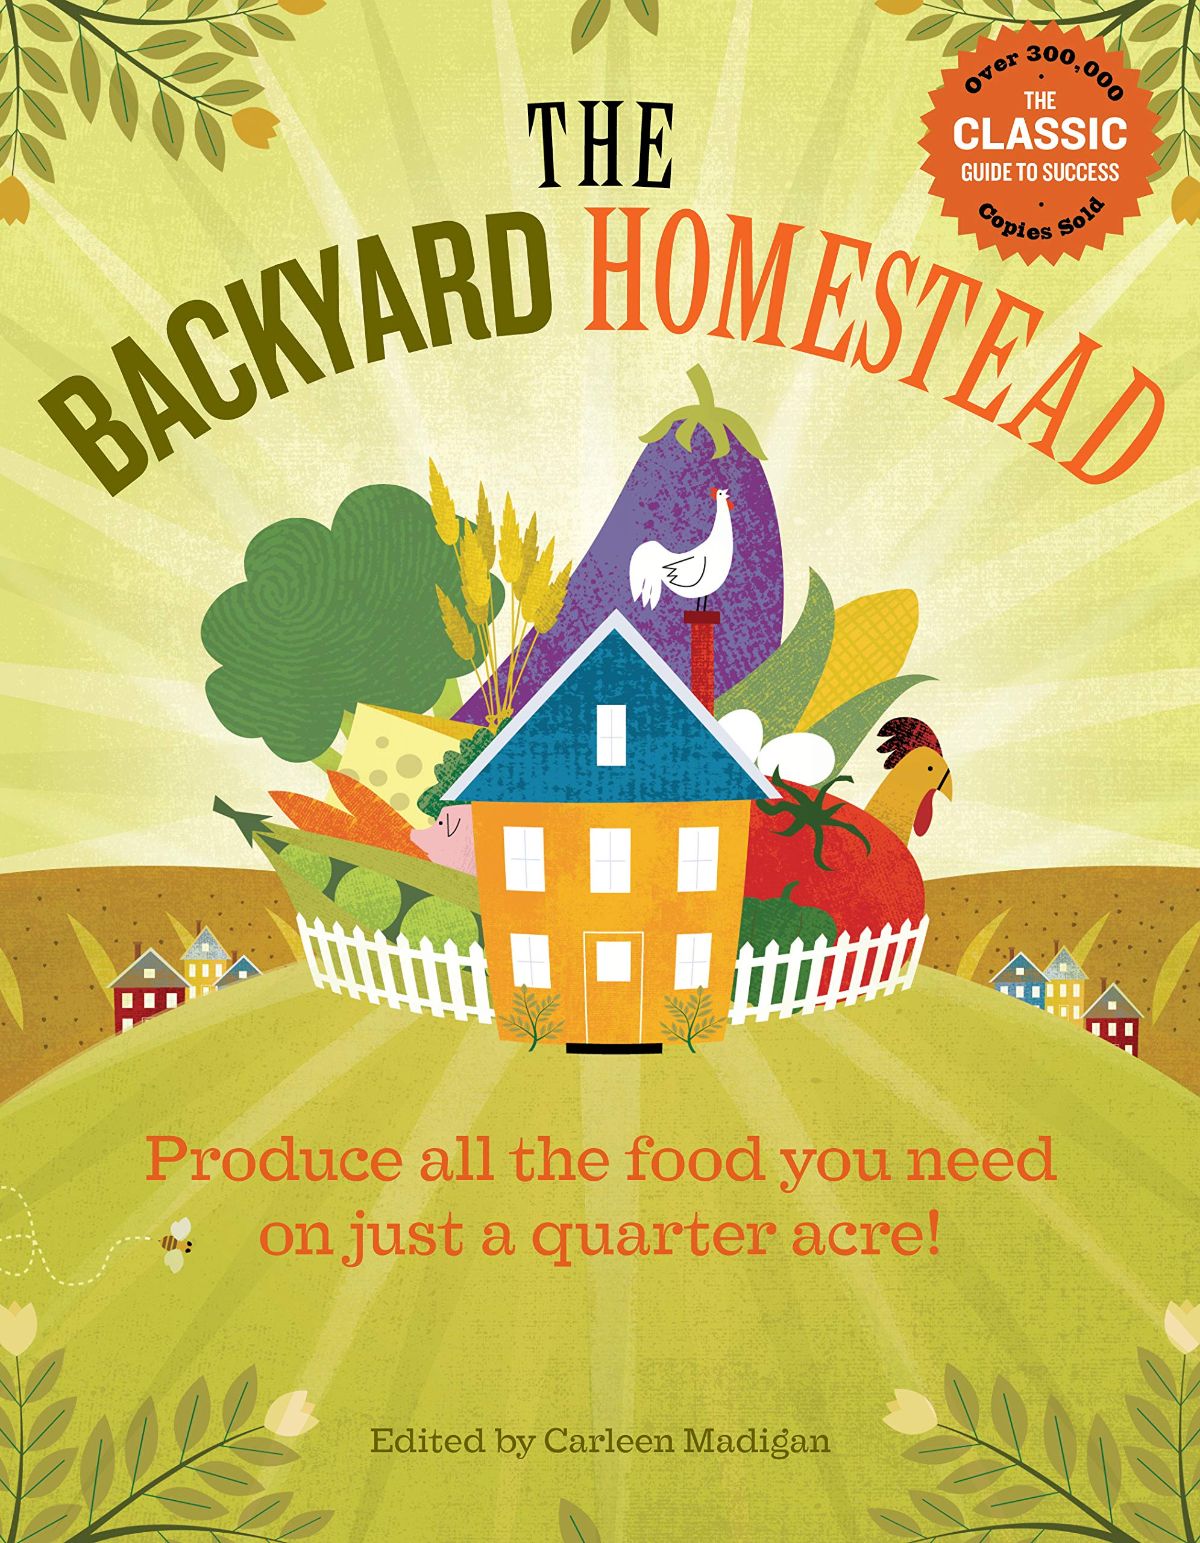 Picture of the cover of the book The Backyard Homestead